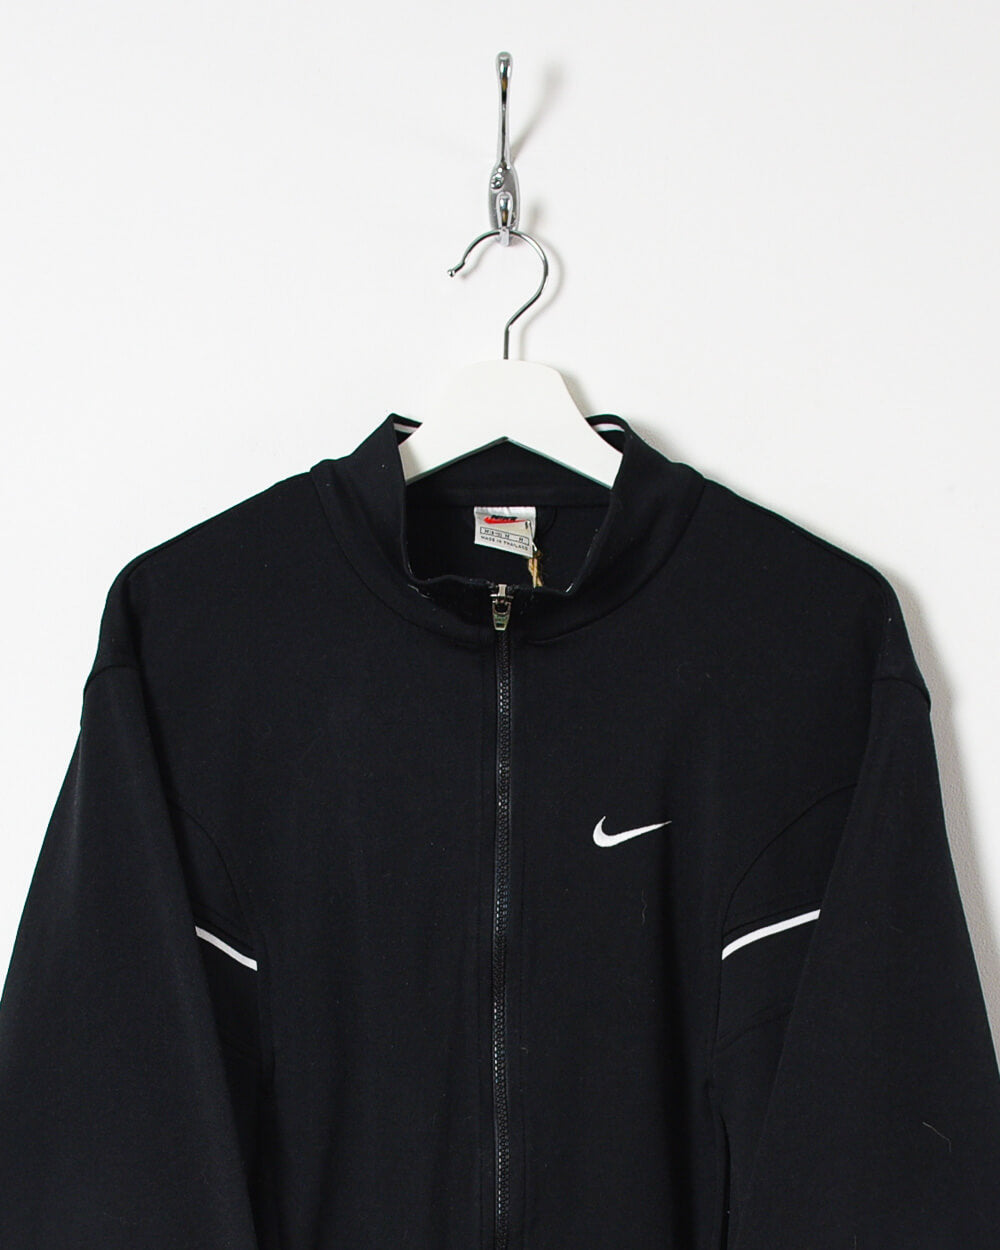 Nike Women's Tracksuit Top - Medium - Domno Vintage 90s, 80s, 00s Retro and Vintage Clothing 